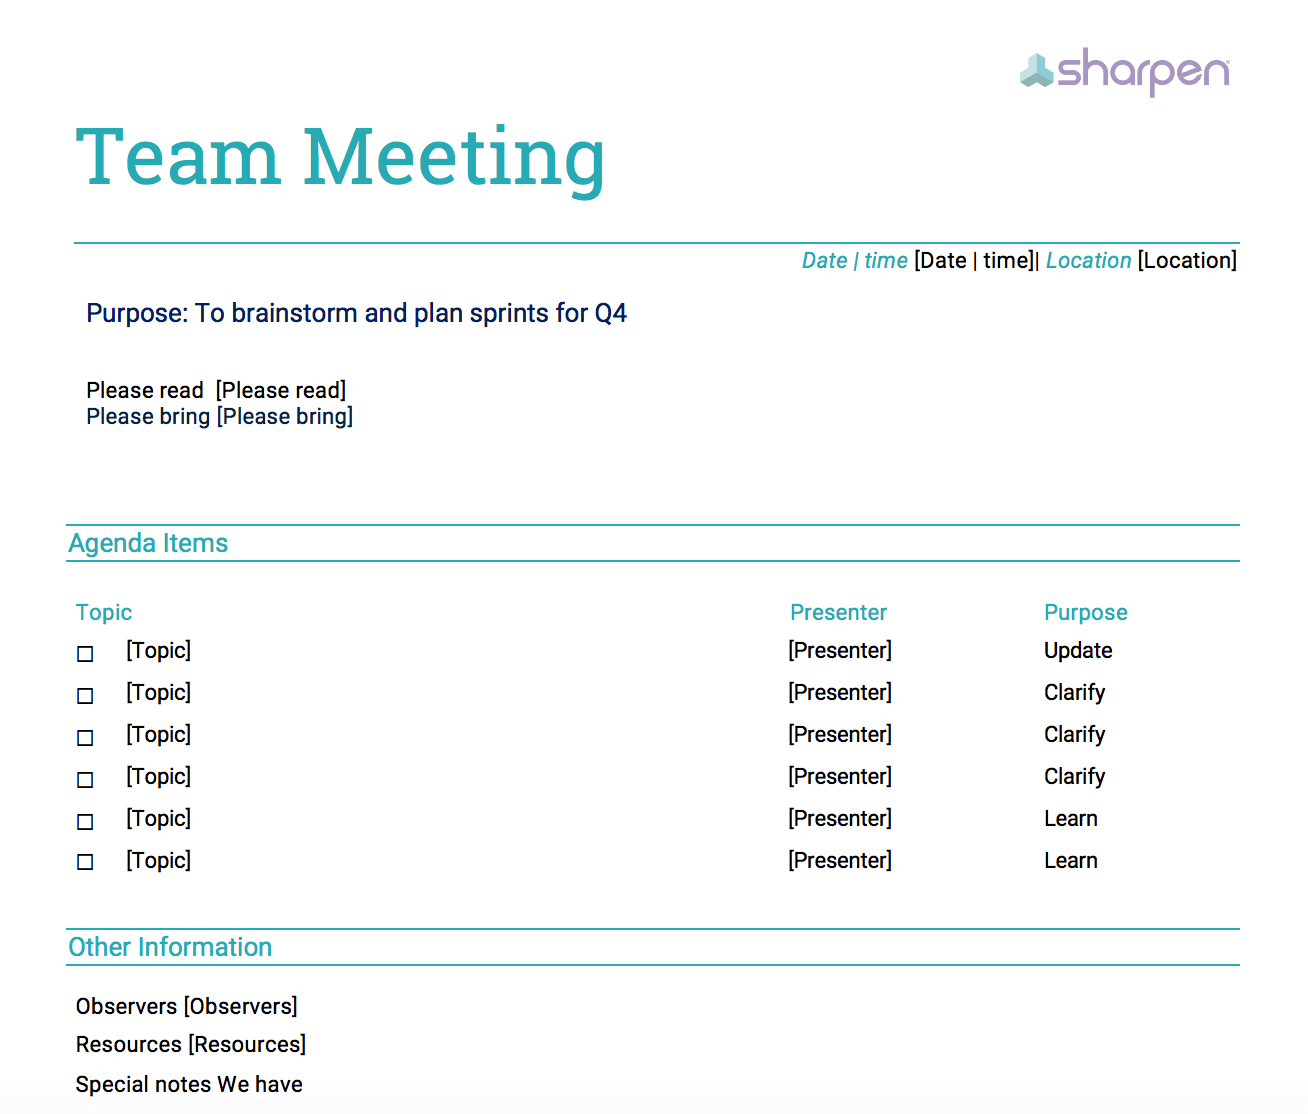 Use this template to create your own customer service team meeting agenda